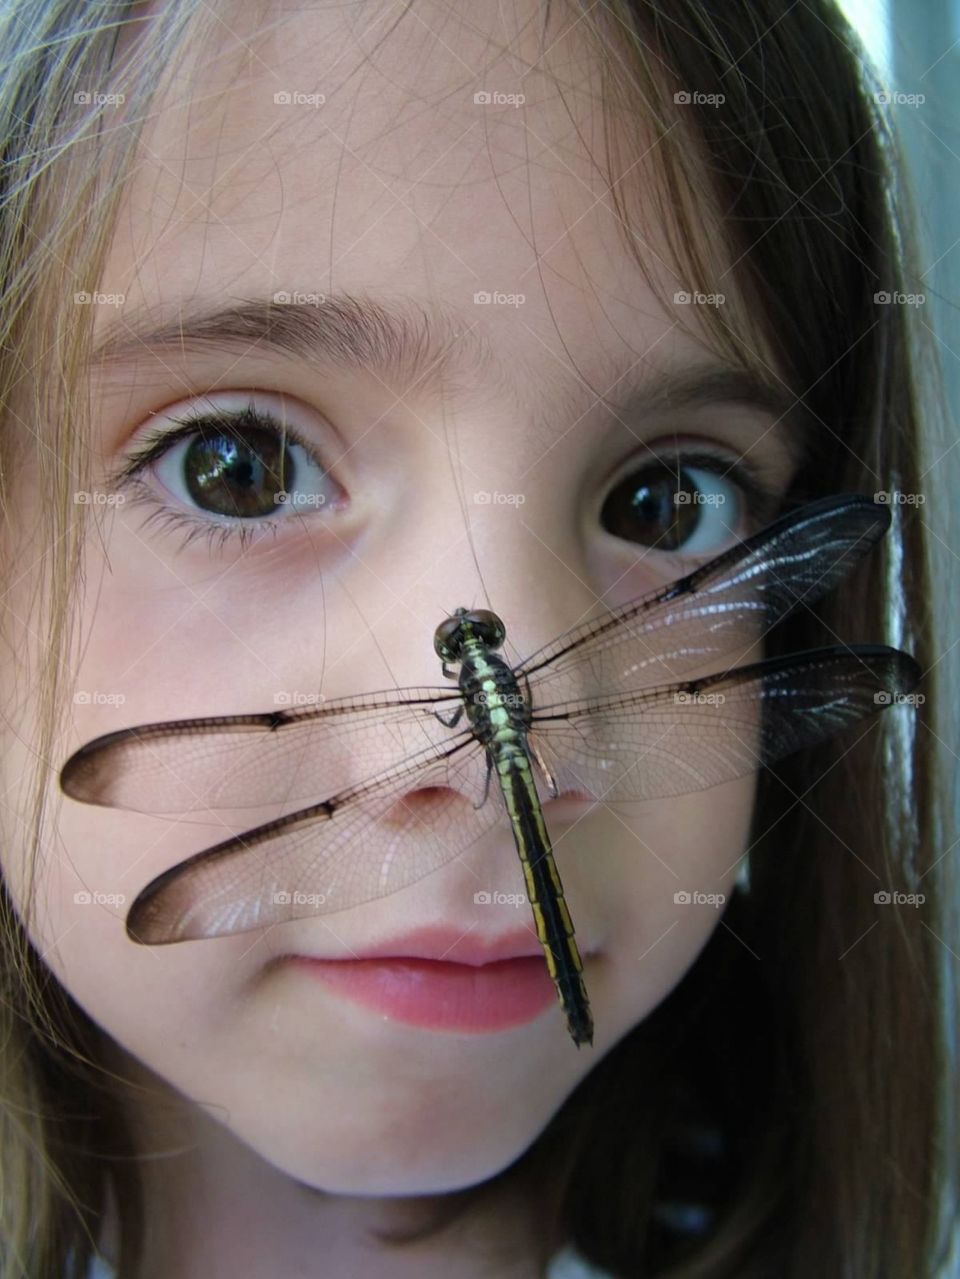 The girl with the dragonfly on her face